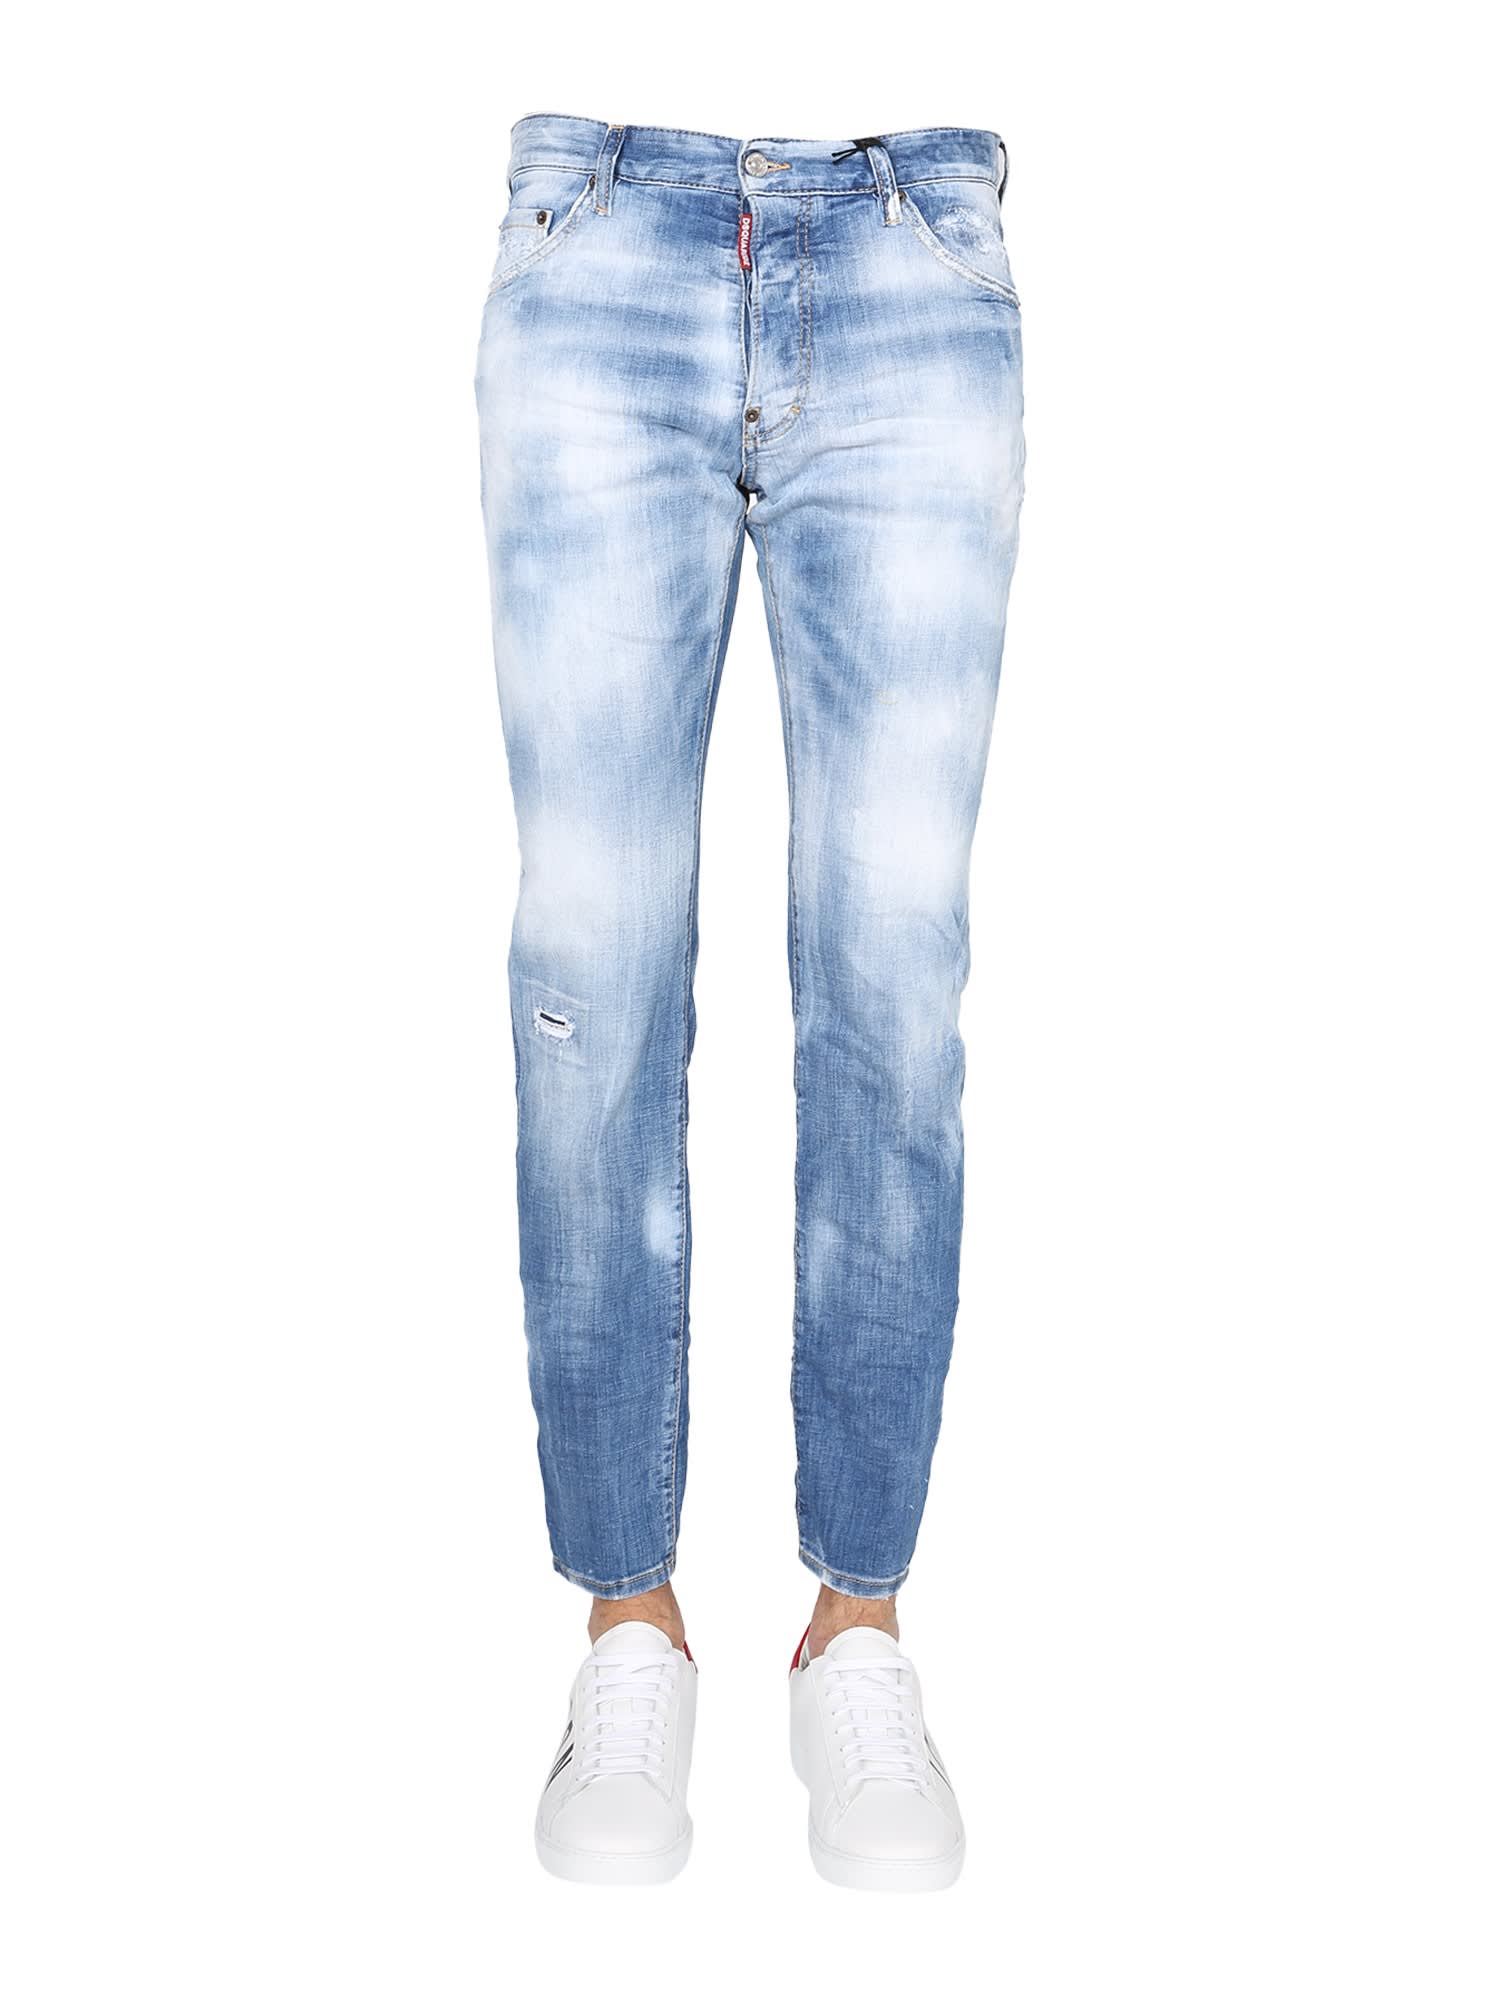 DSQUARED2 COOL GUY JEANS,S71LB0901 S30342470